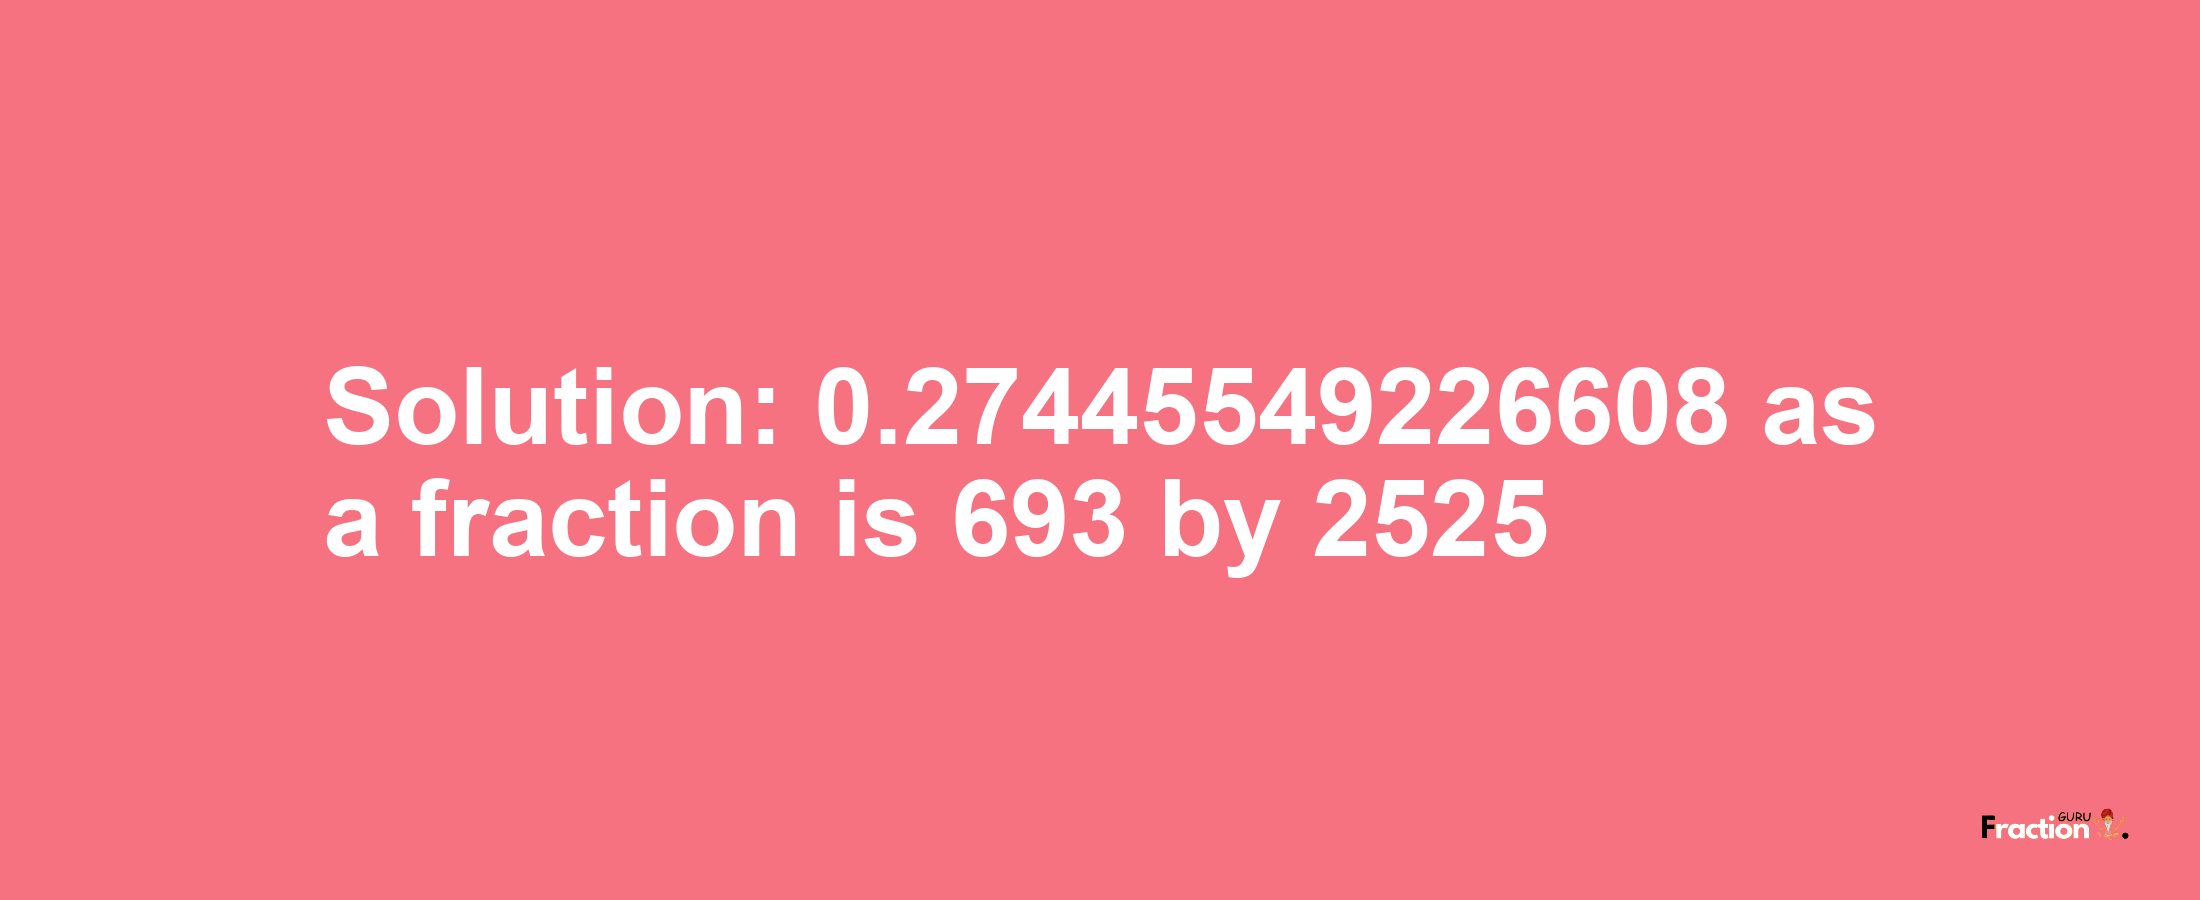 Solution:0.27445549226608 as a fraction is 693/2525